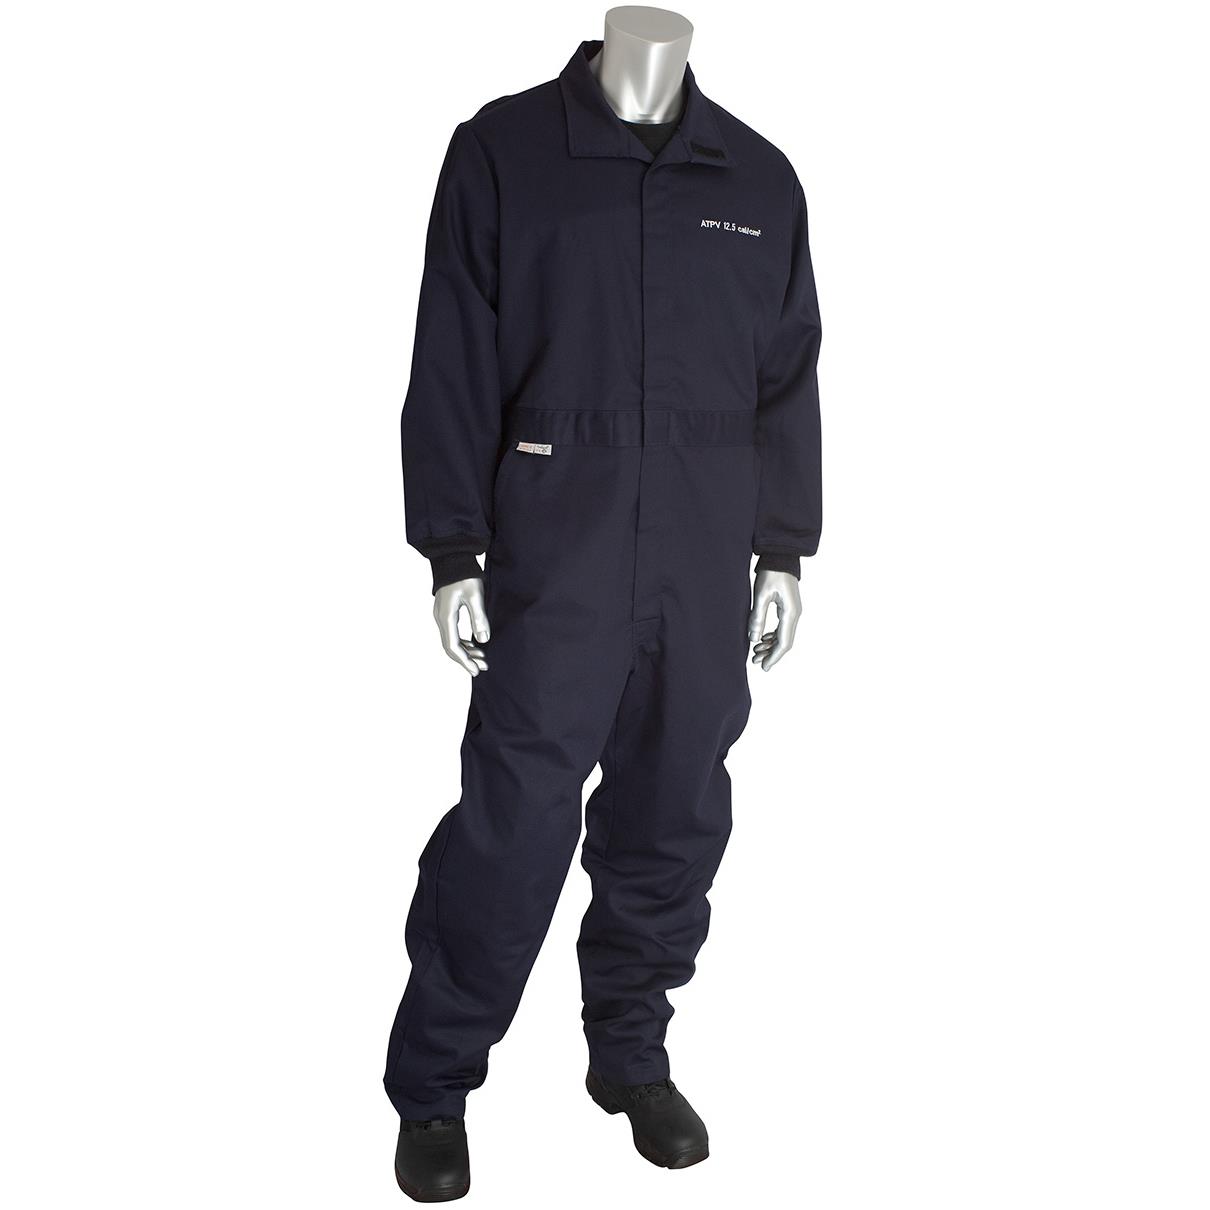 AR/FR Dual Certified Coverall, 12 Cal/cm2